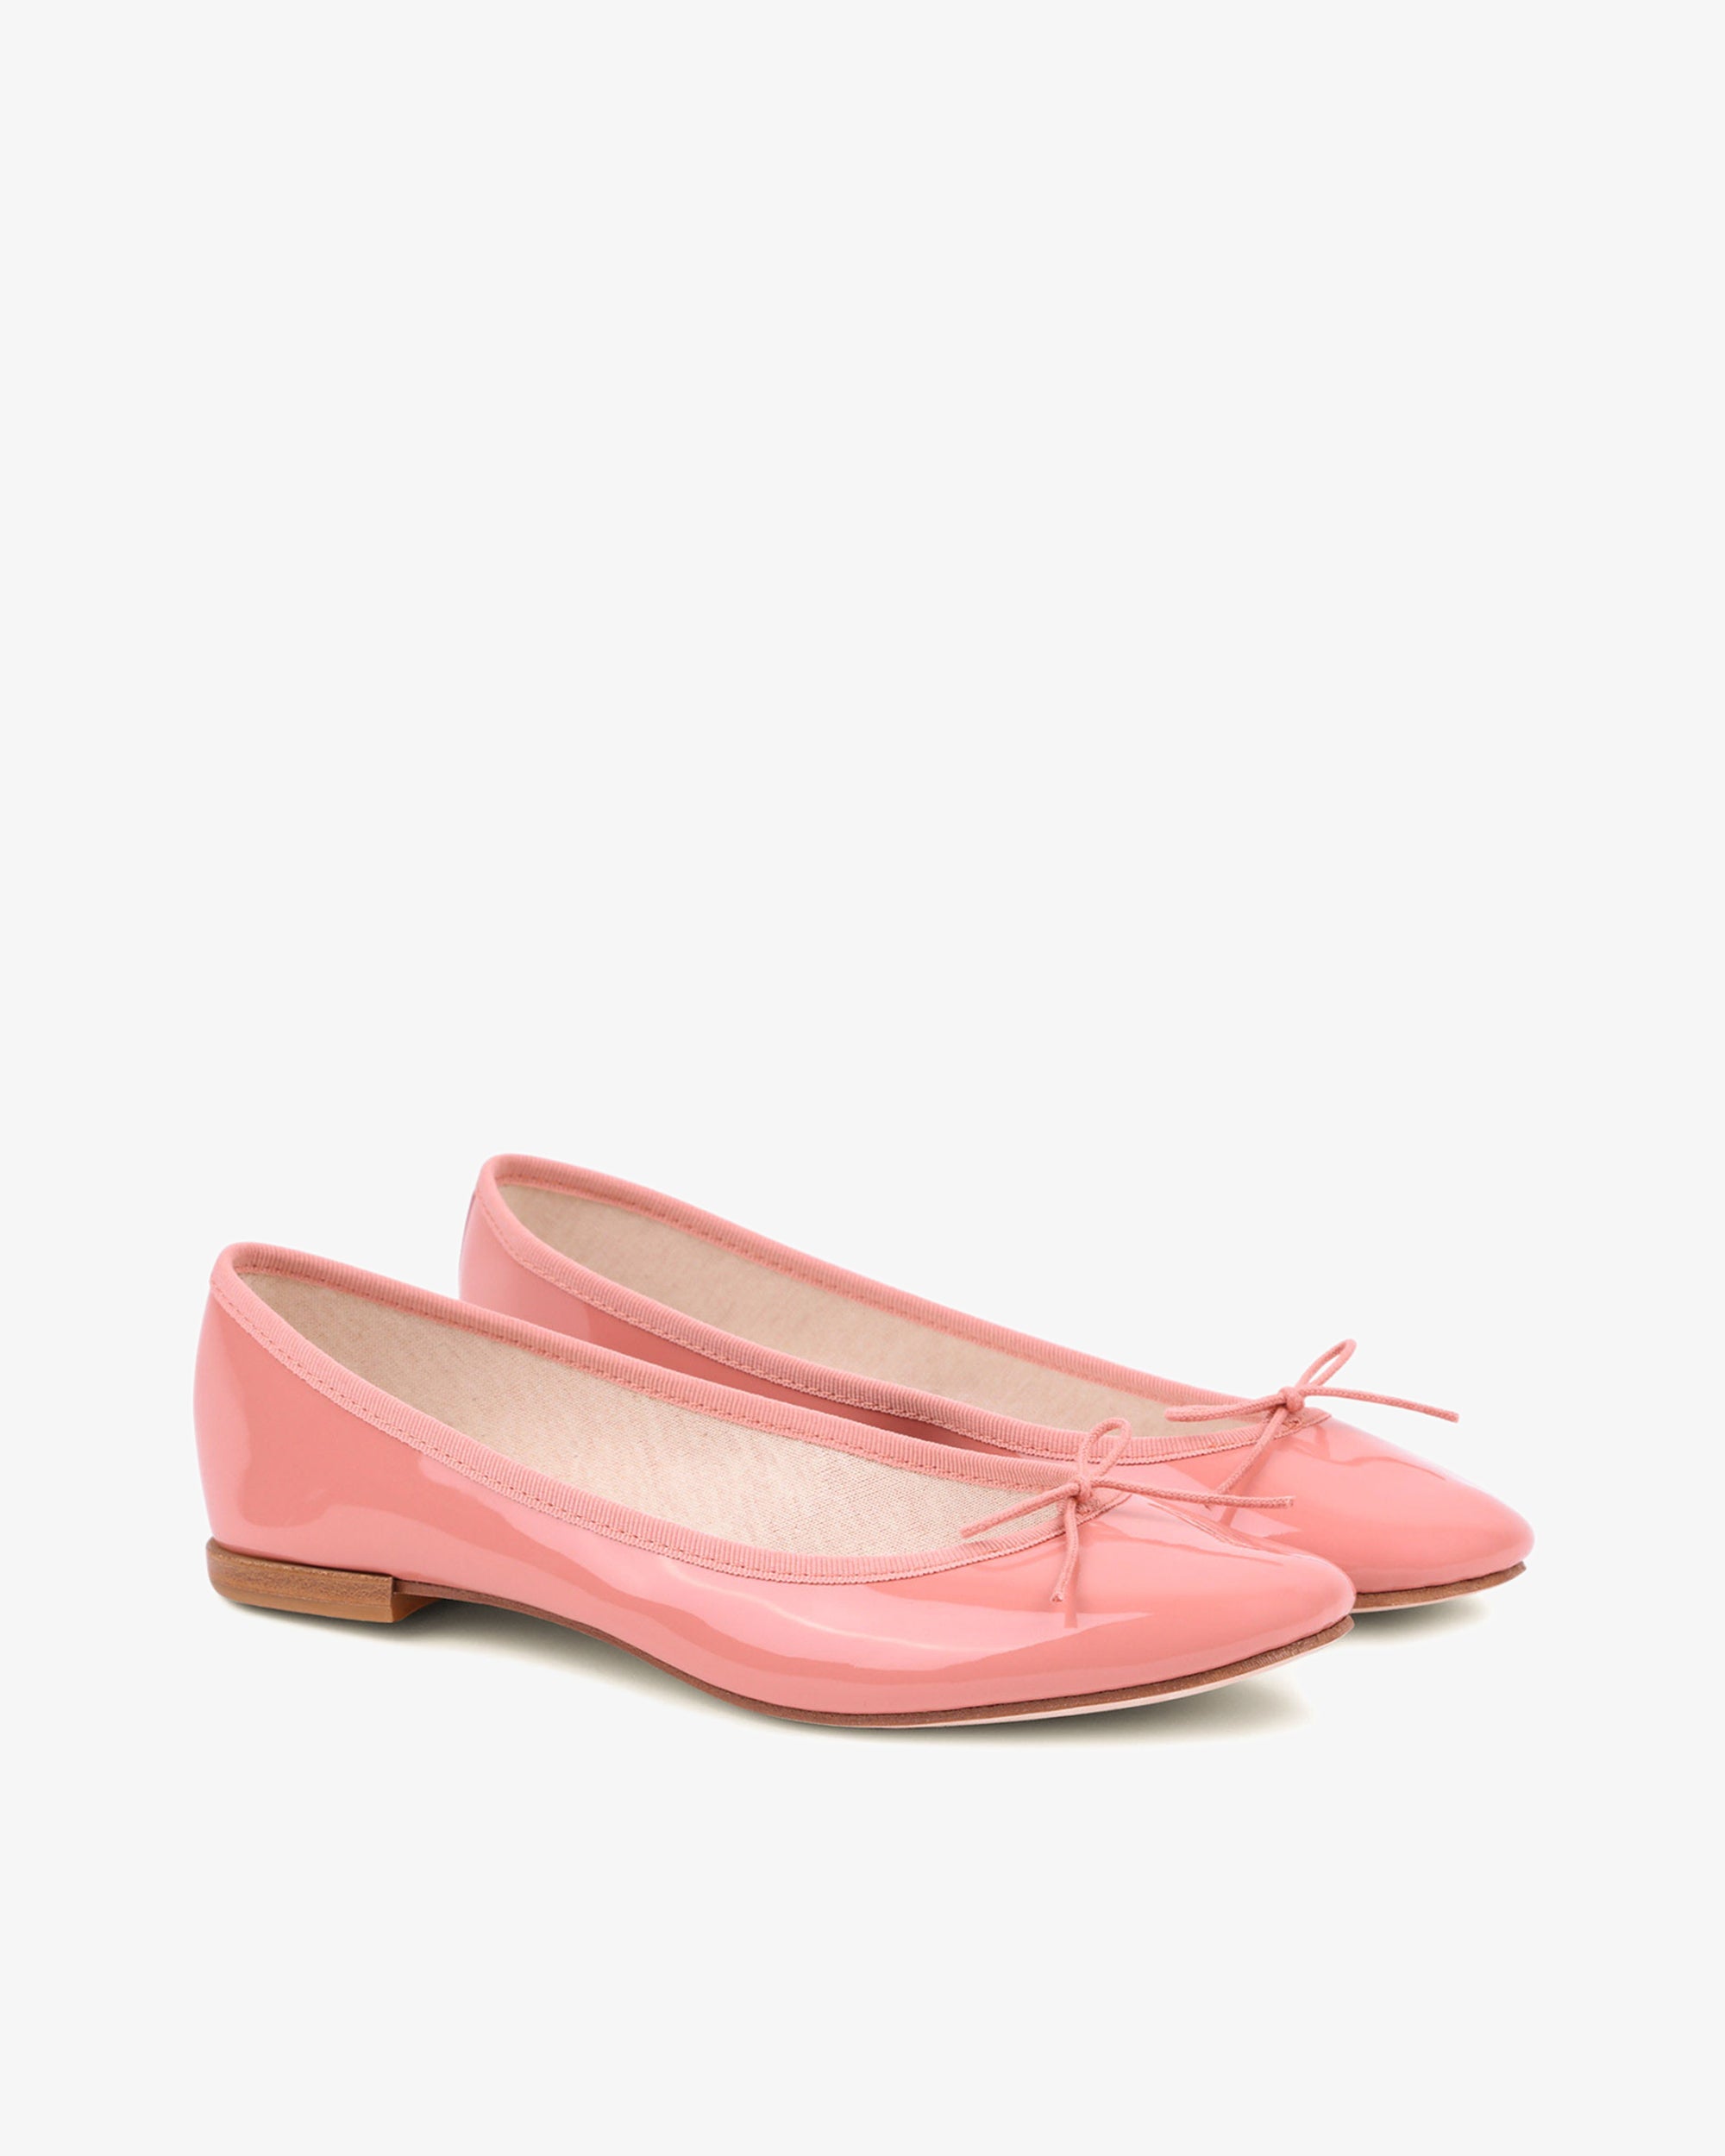 Camille ballerinas in rose water leather – Repetto